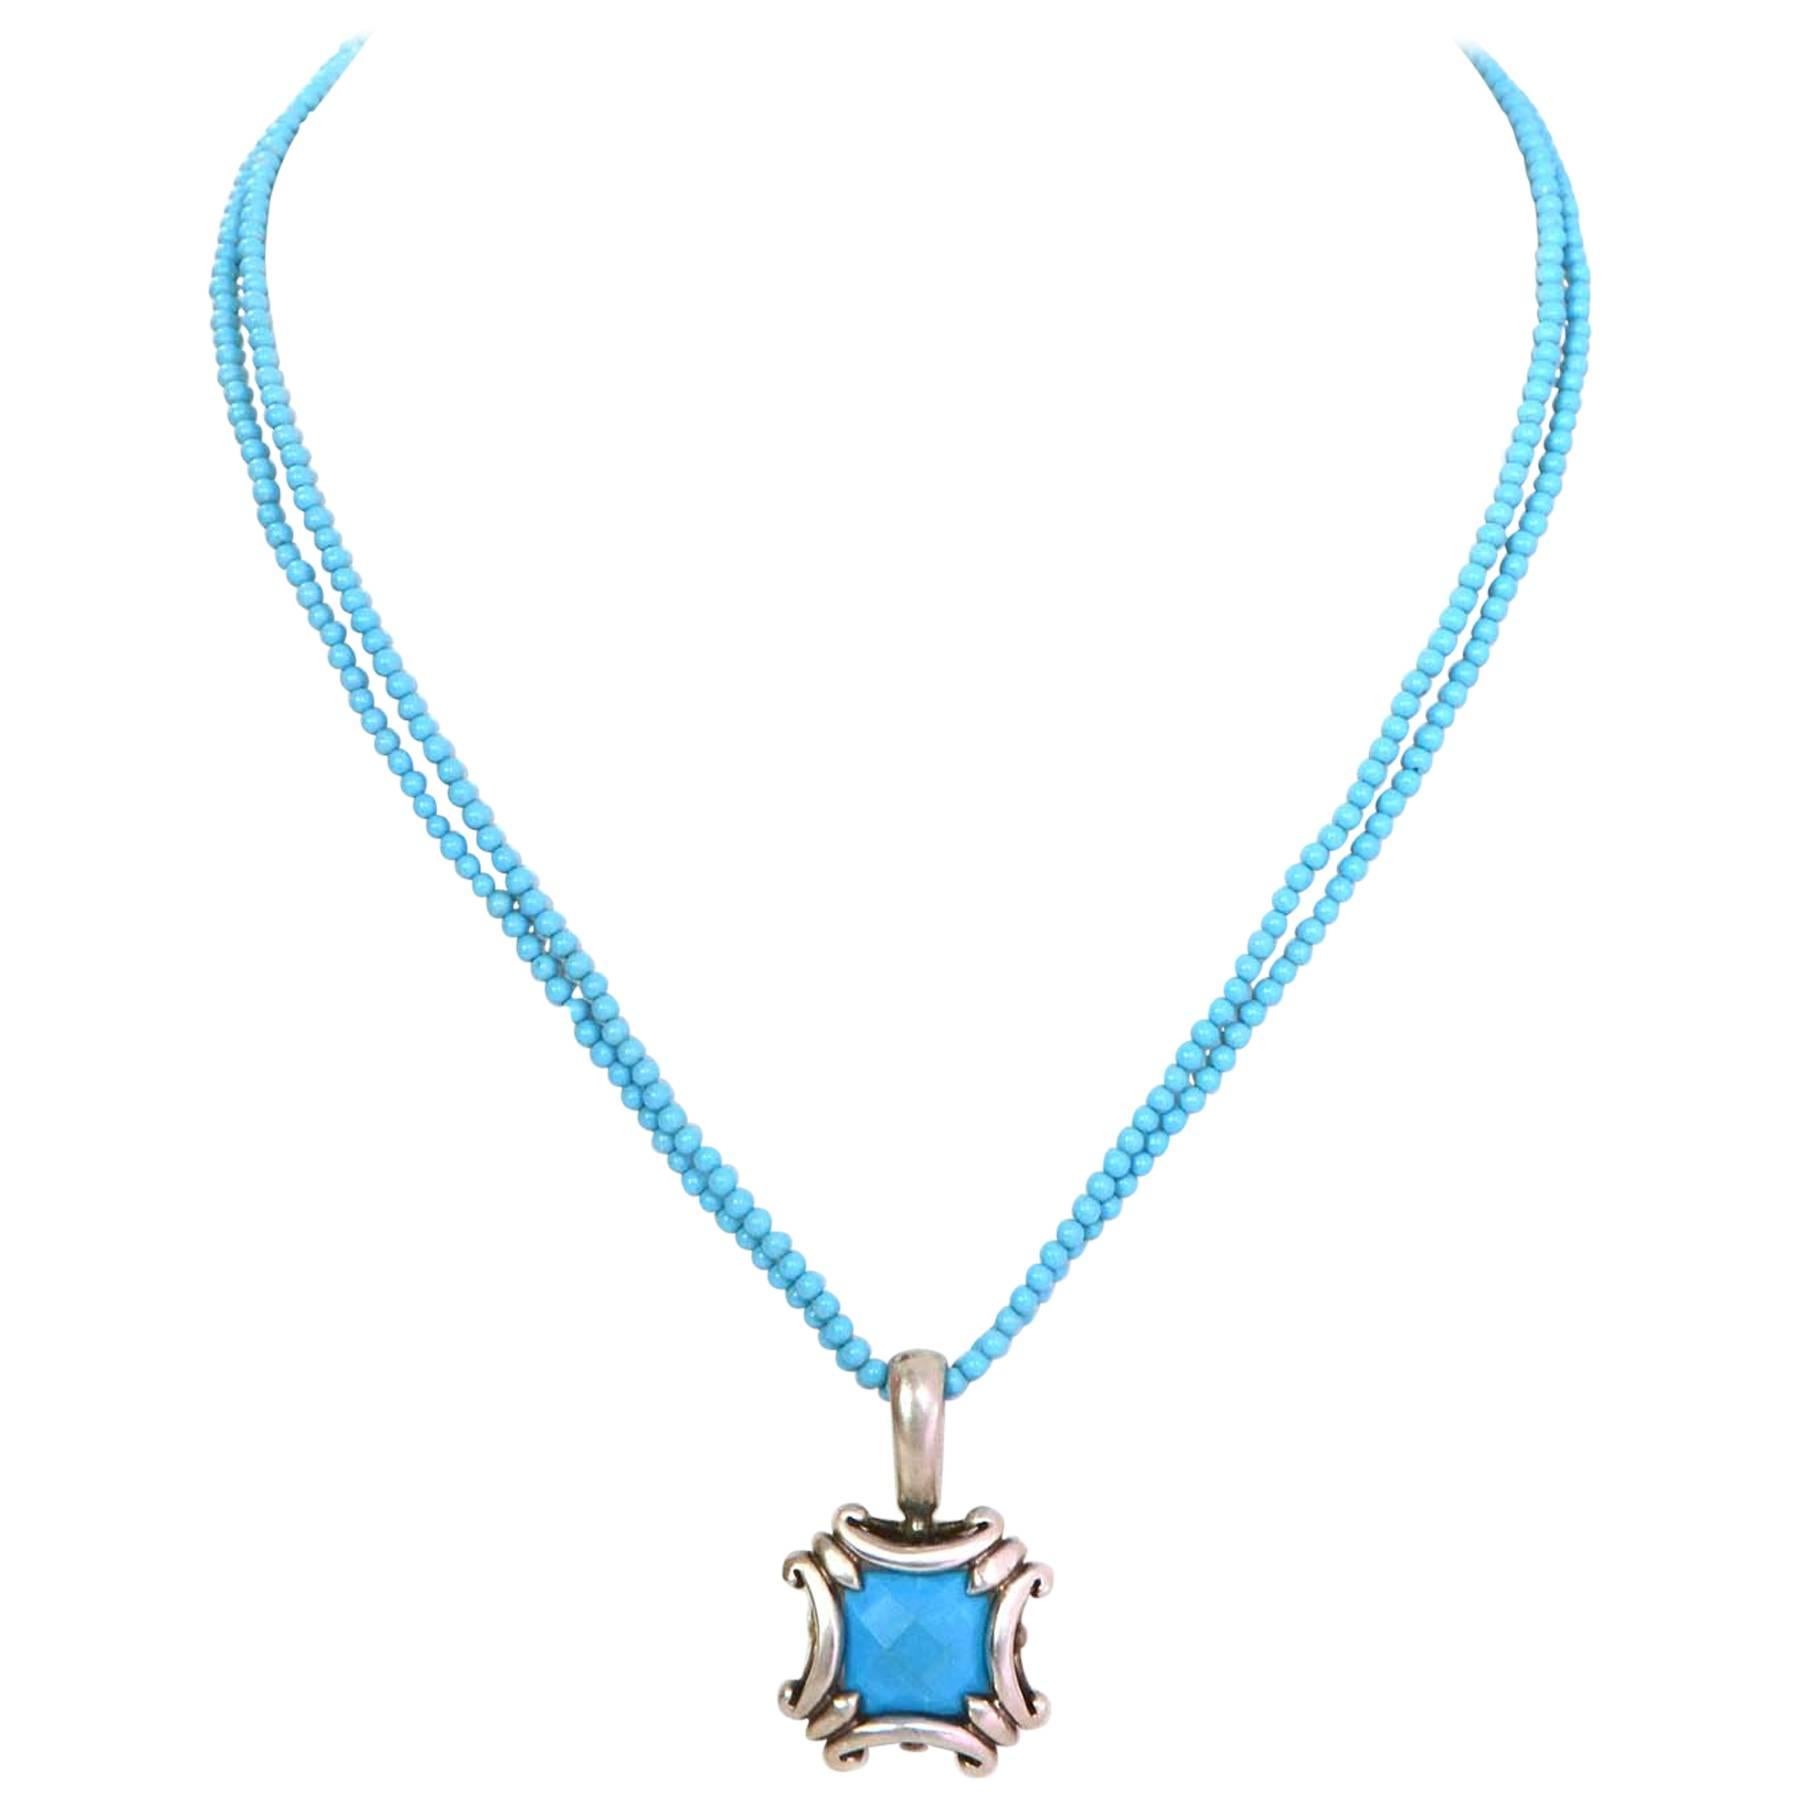 Robin Rotenier Turquoise and Sterling Silver Beaded Pendant Necklace 
Features double strand of turquoise beads complemented with a sterling and turquoise pendant

Materials: Sterling silver and turquoise
Closure: Robin Rotenier sterling silver